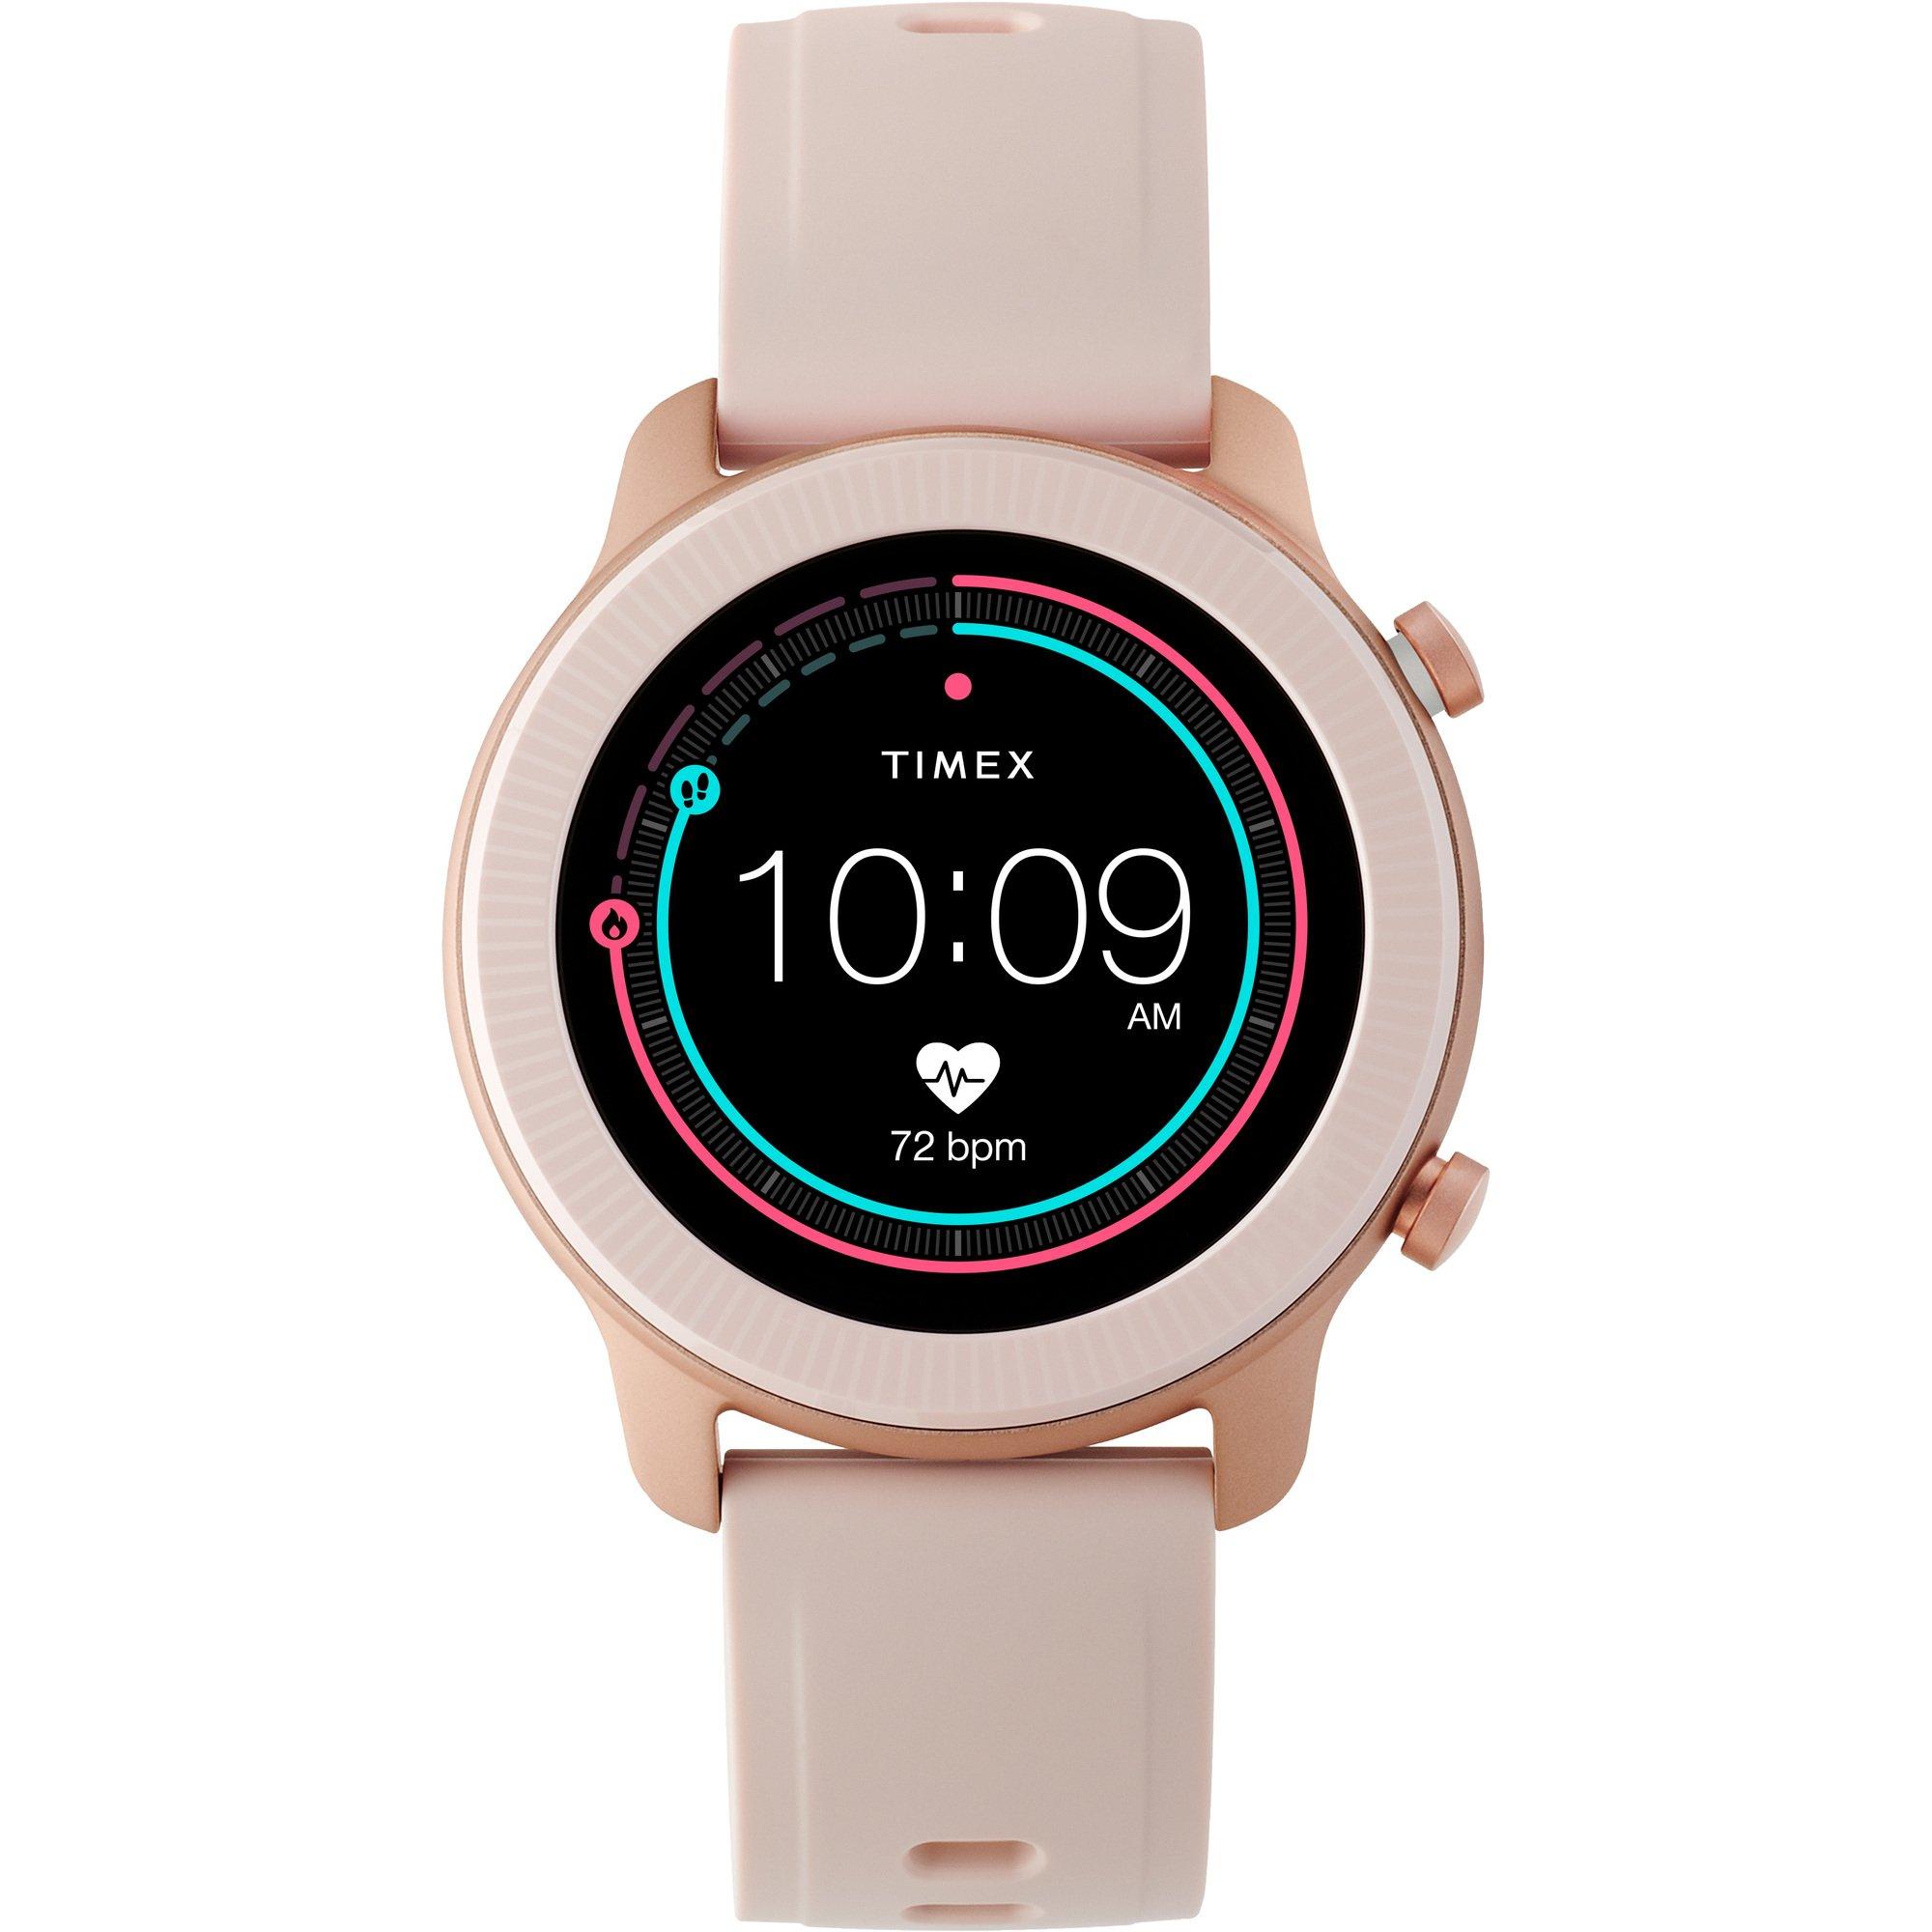 Timex Metropolitan R AMOLED GPS & Heart Rate 42mm Smartwatch Rose Gold with Blush Silicone Strap